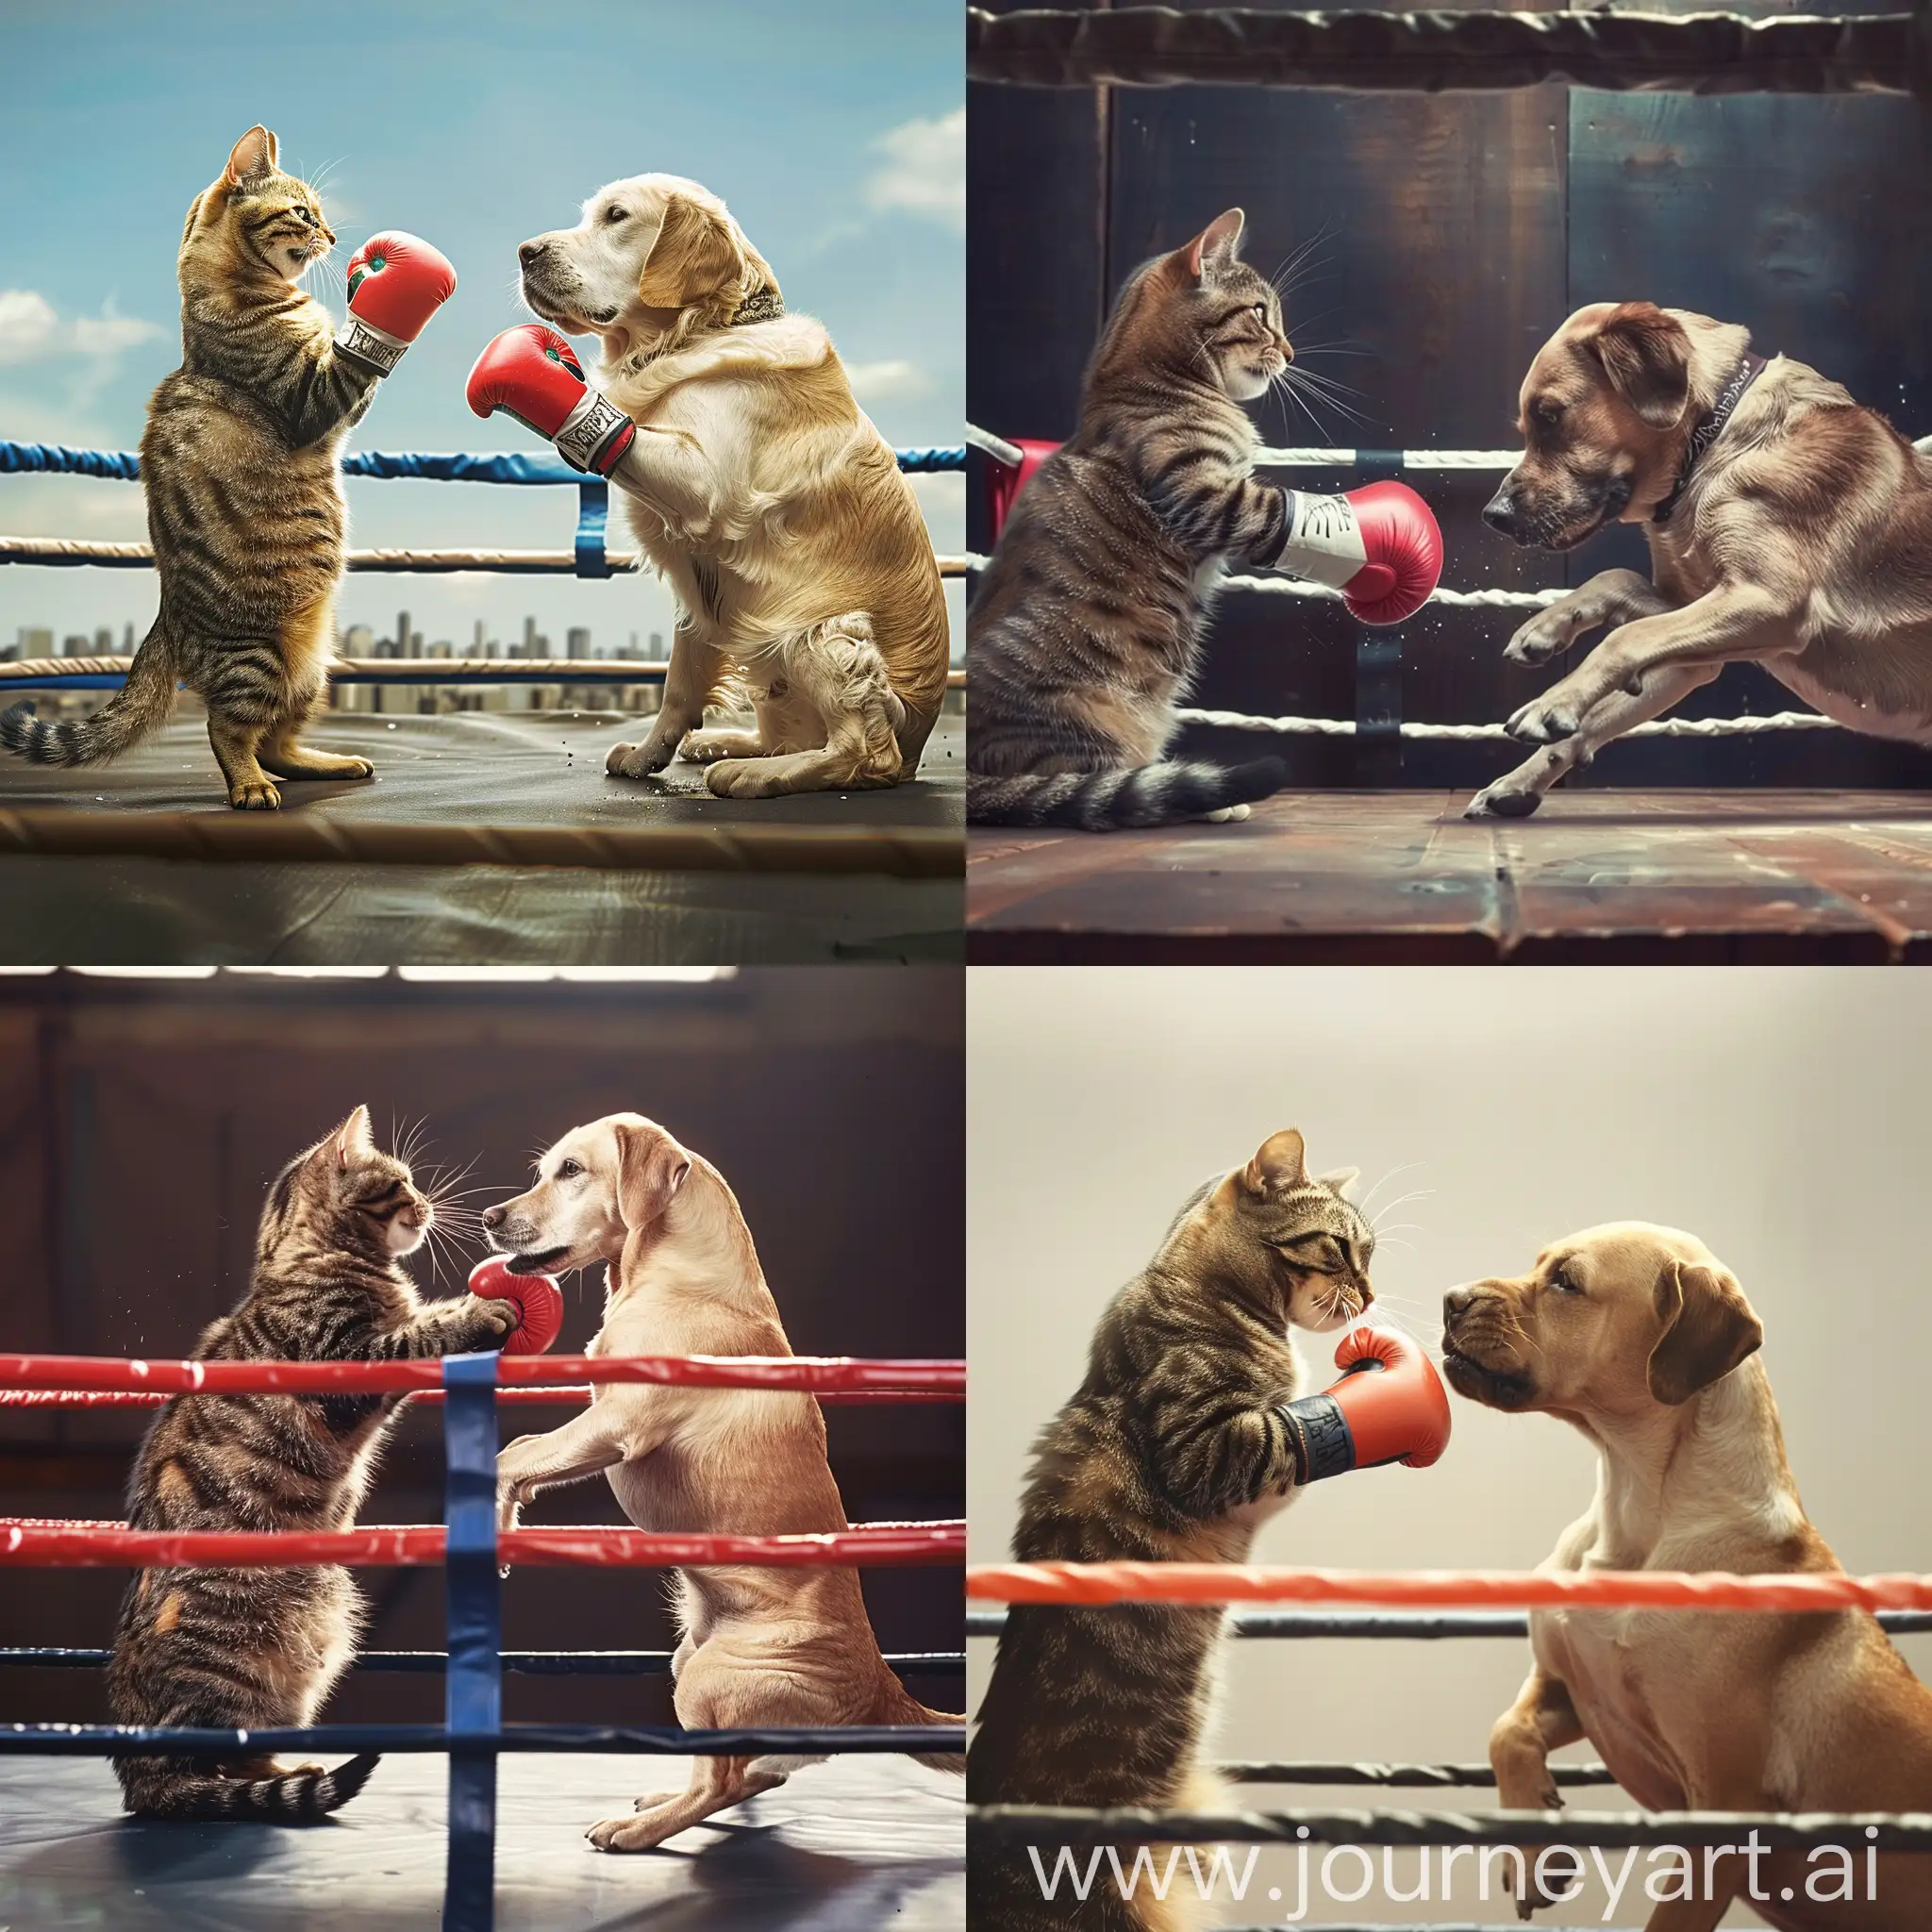 Fierce-Cat-vs-Determined-Dog-Intense-Boxing-Match-in-the-Ring